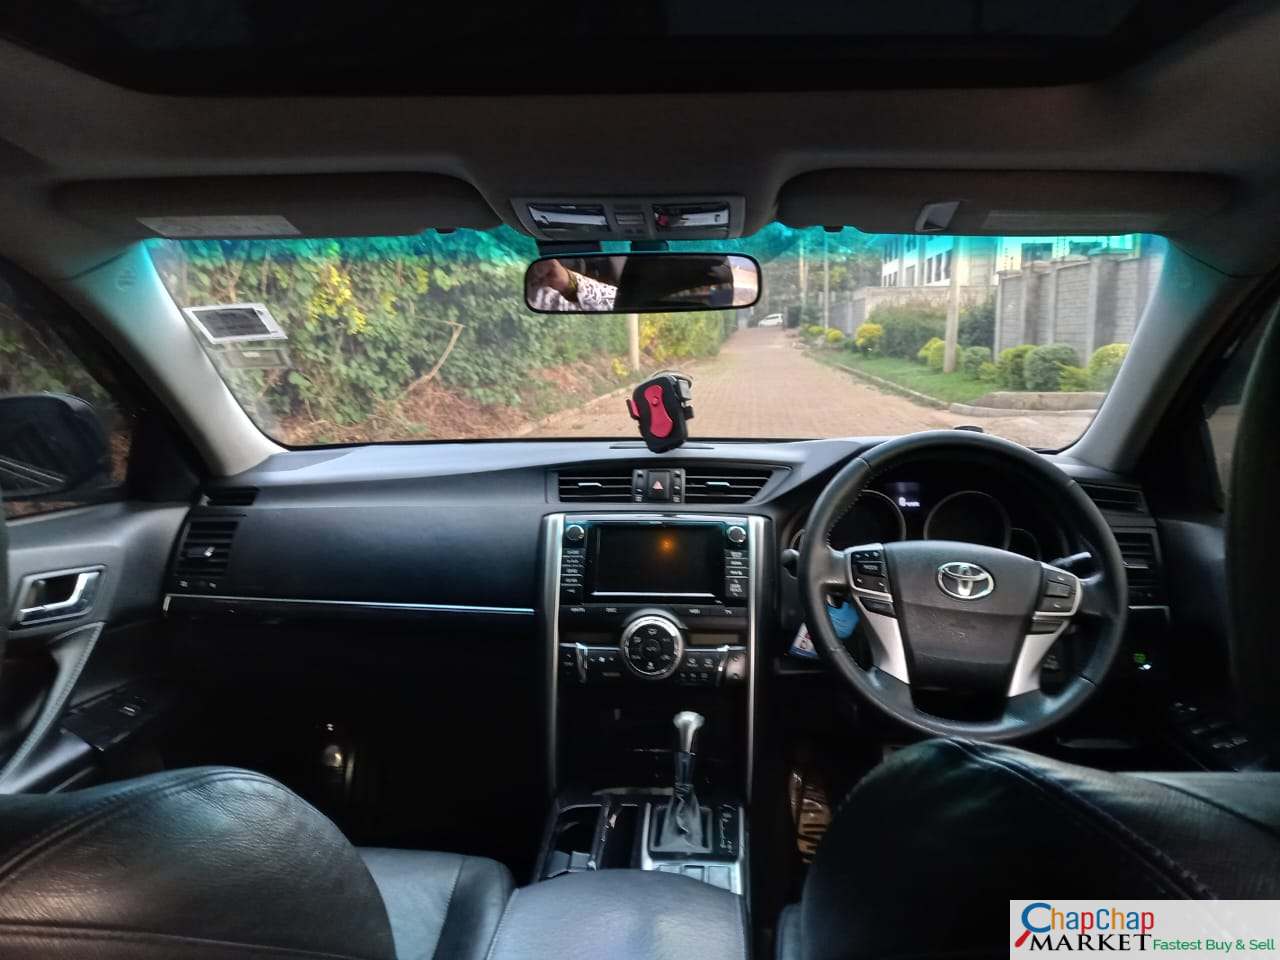 Toyota Mark X Kenya with sunroof QUICK SALE You Pay 30% Deposit Trade in OK EXCLUSIVE Mark x for sale in kenya hire purchase installments (SOLD)